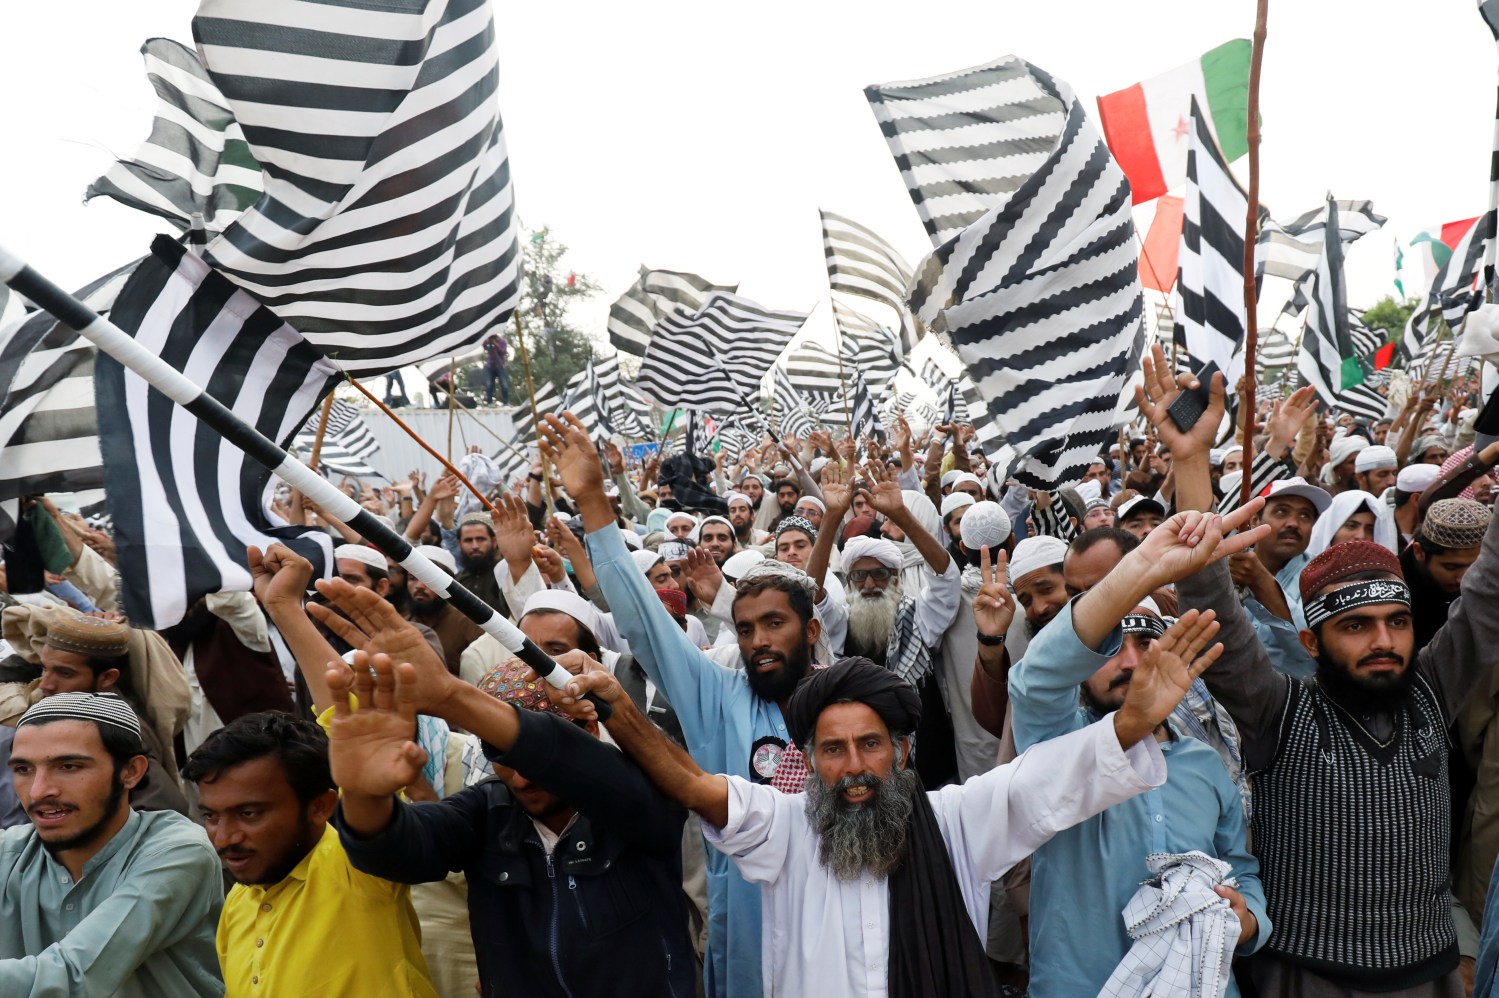 Supporters of religious and political party Jamiat Ulema-i-Islam-Fazal (JUI-F) wave flags and chant slogans during what participants call Azadi March (Freedom March) to protest the government of Prime Minister Imran Khan in Islamabad, Pakistan November 2, 2019. REUTERS/Akhtar Soomro - RC14C39D0790